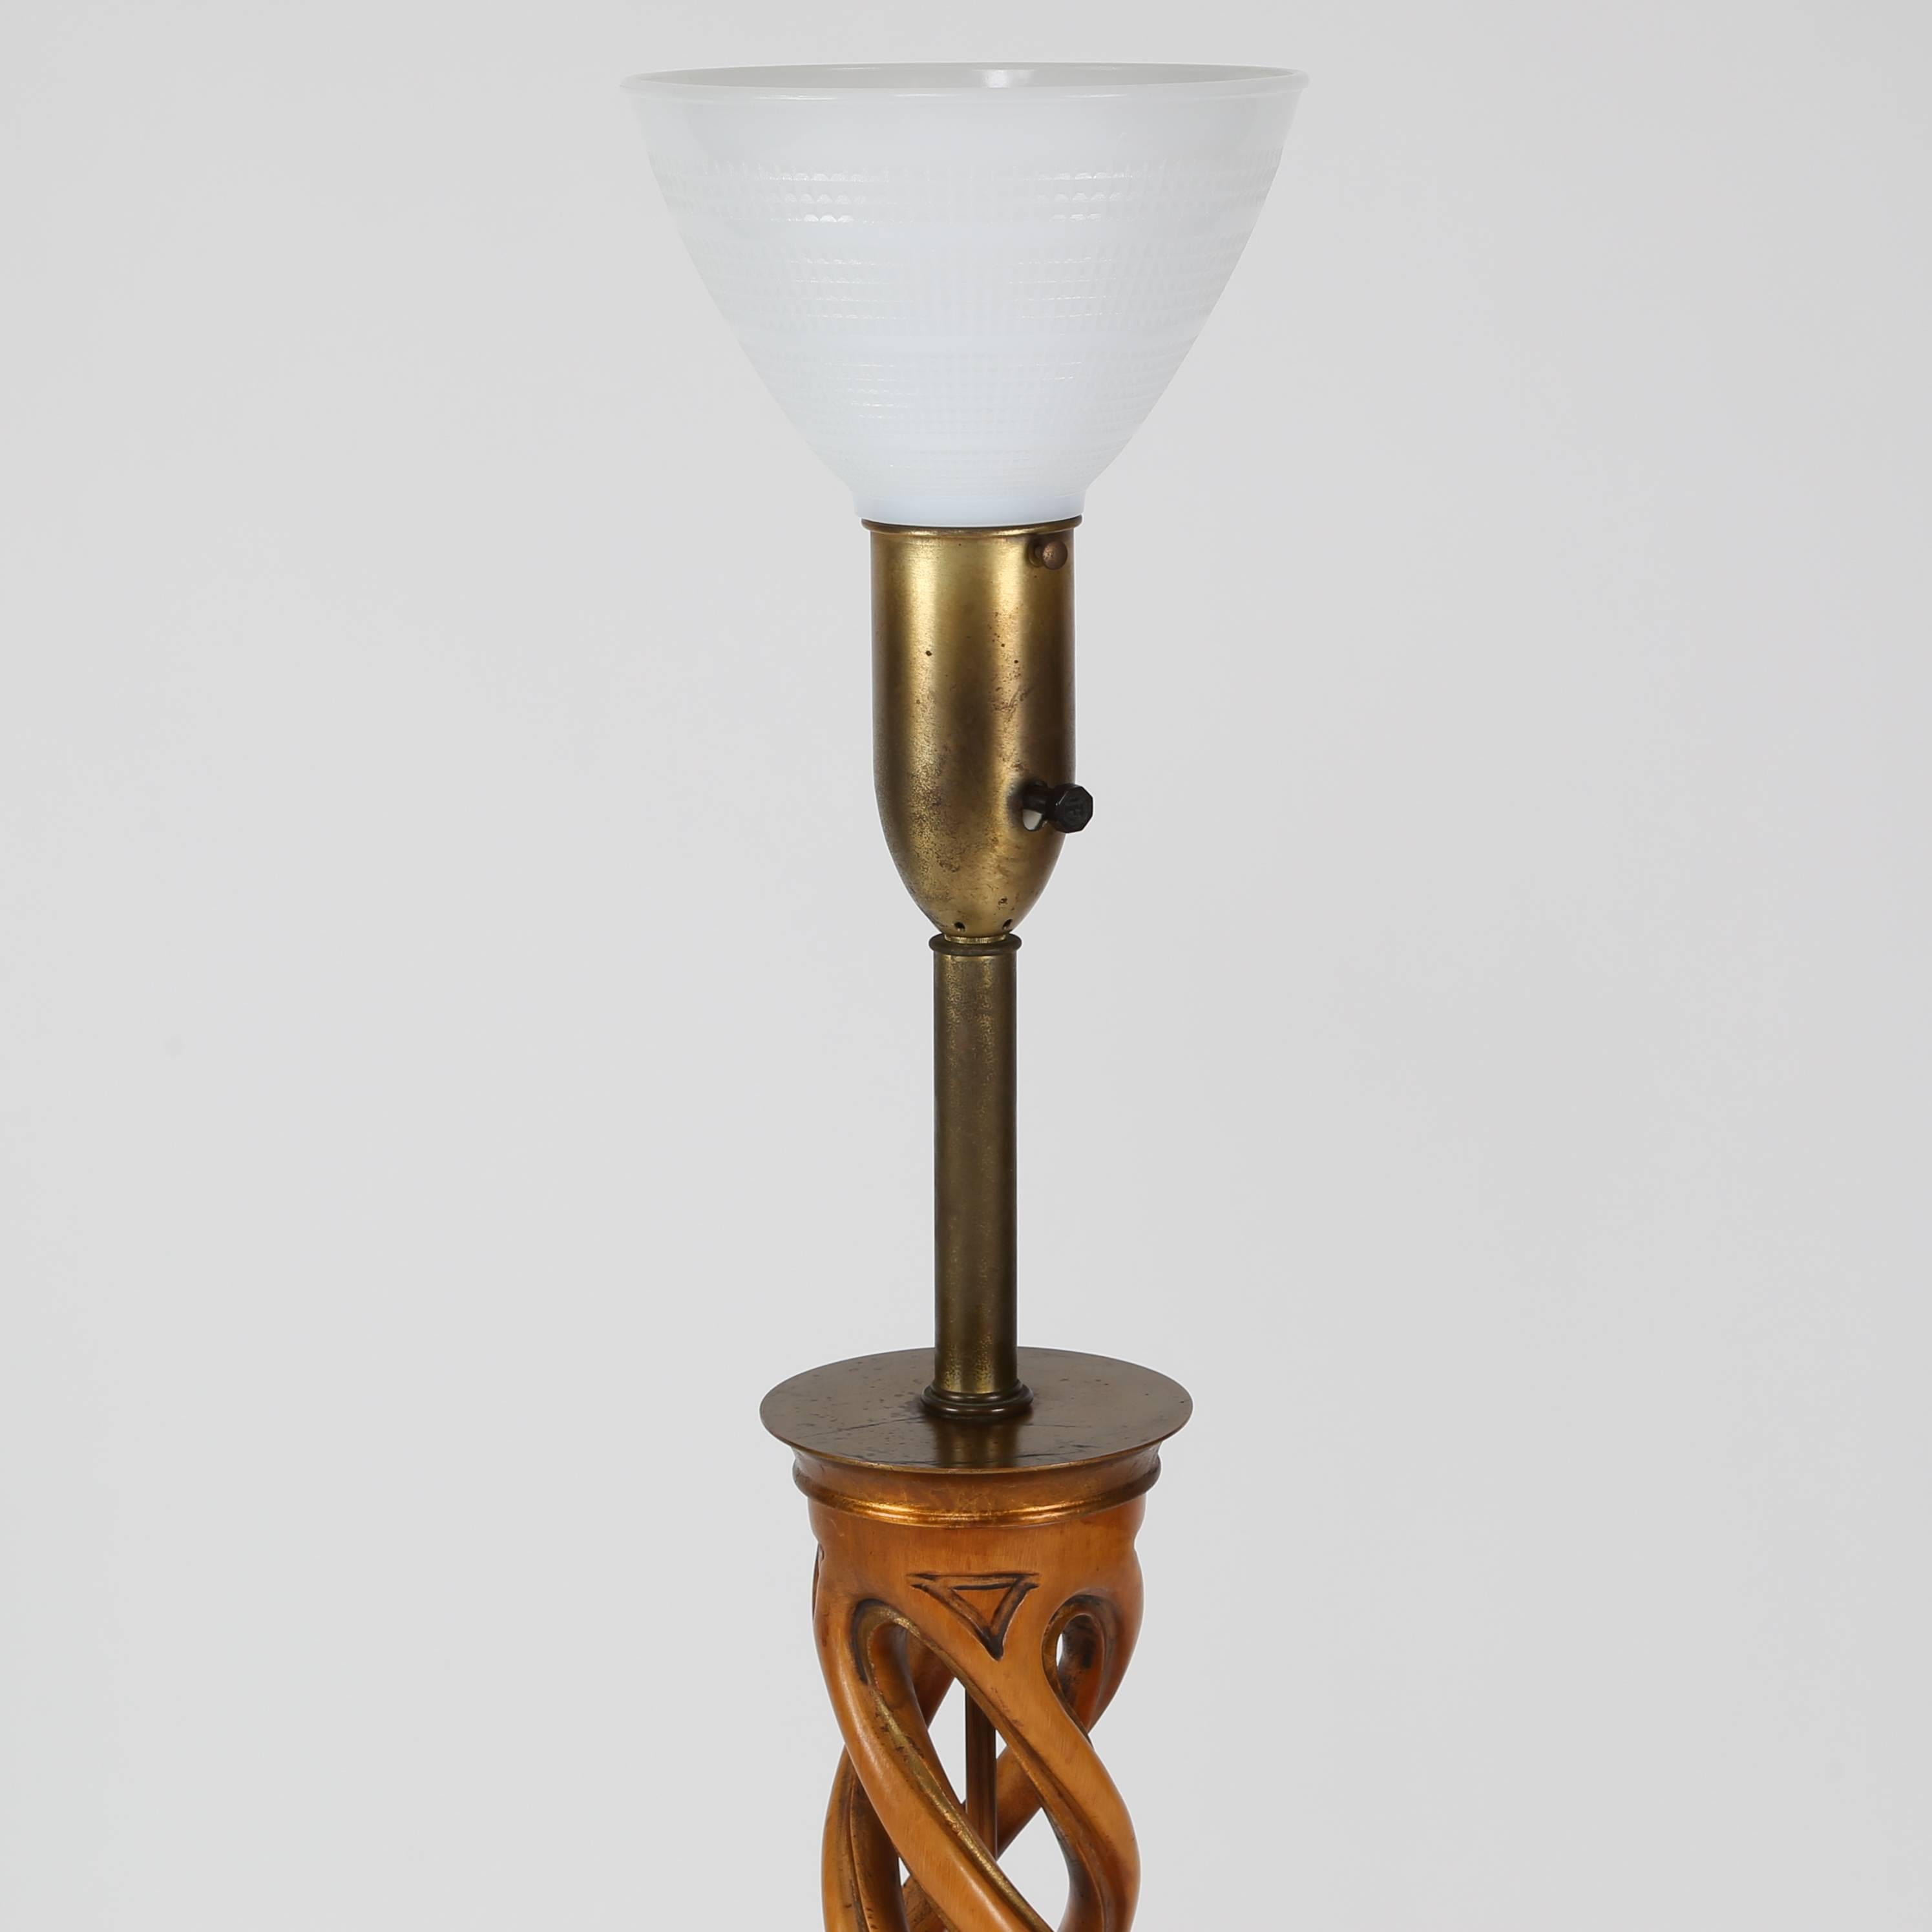 Gilt Frederick Cooper Studios Carved Helix Table Lamp, Circa 1950s For Sale